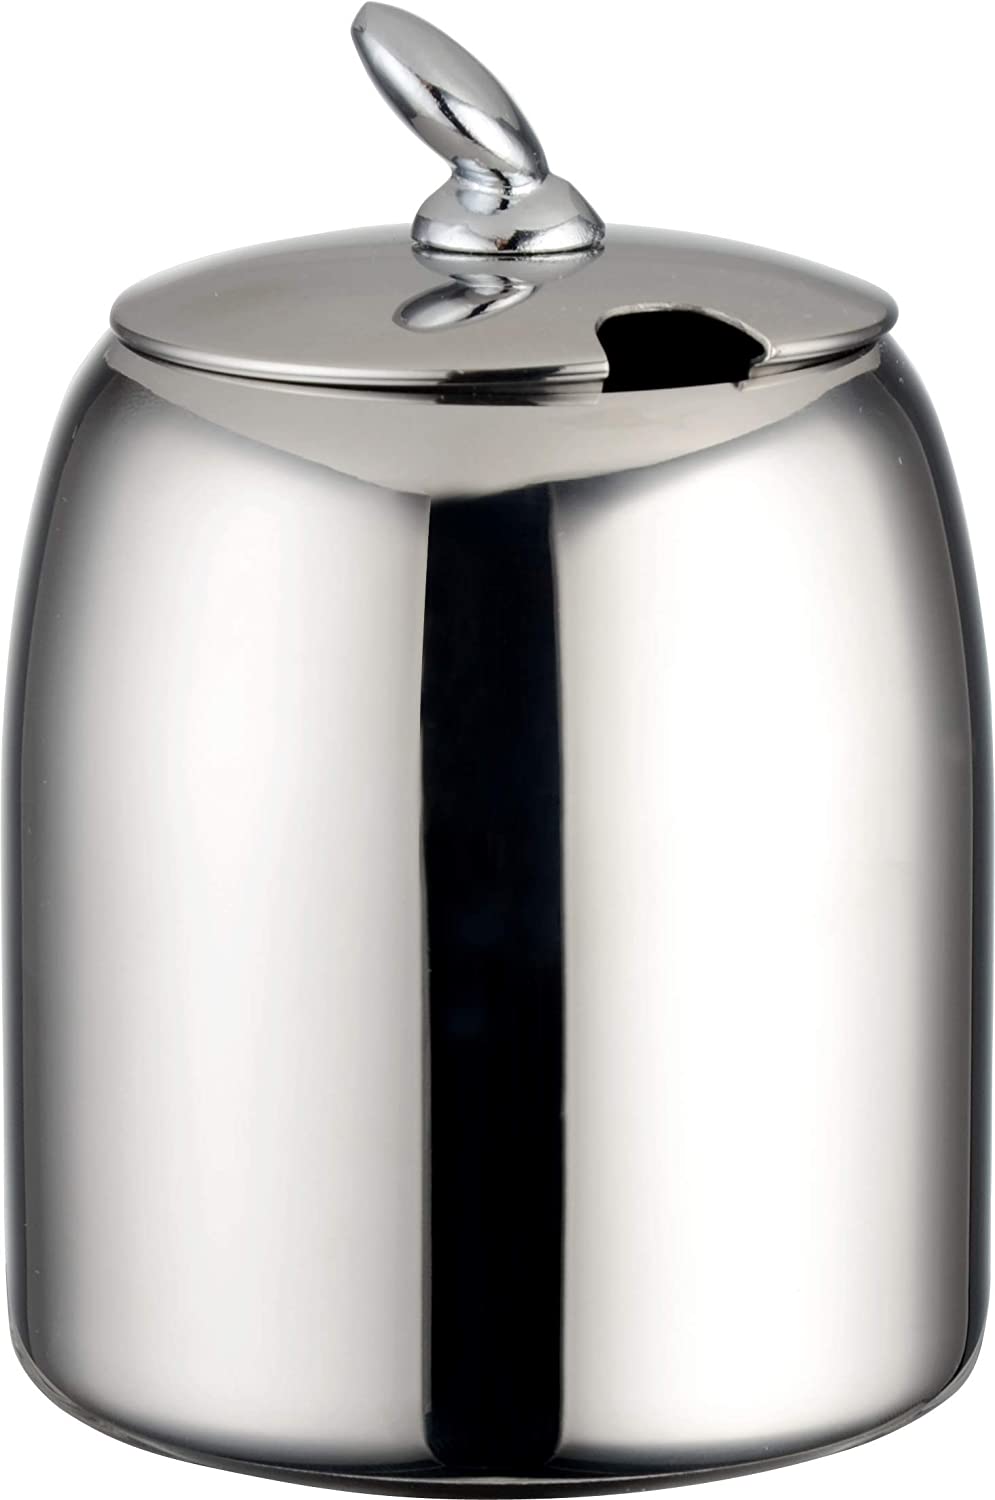 Cafe Ole Café Olé CHS-012 Chatsworth Sugar Box with Unique Lid Made of High Quality 18/10 Stainless Steel - High Gloss Polish, 12oz, 0.34L, Storage, Sugar Accessories, Stainless Steel